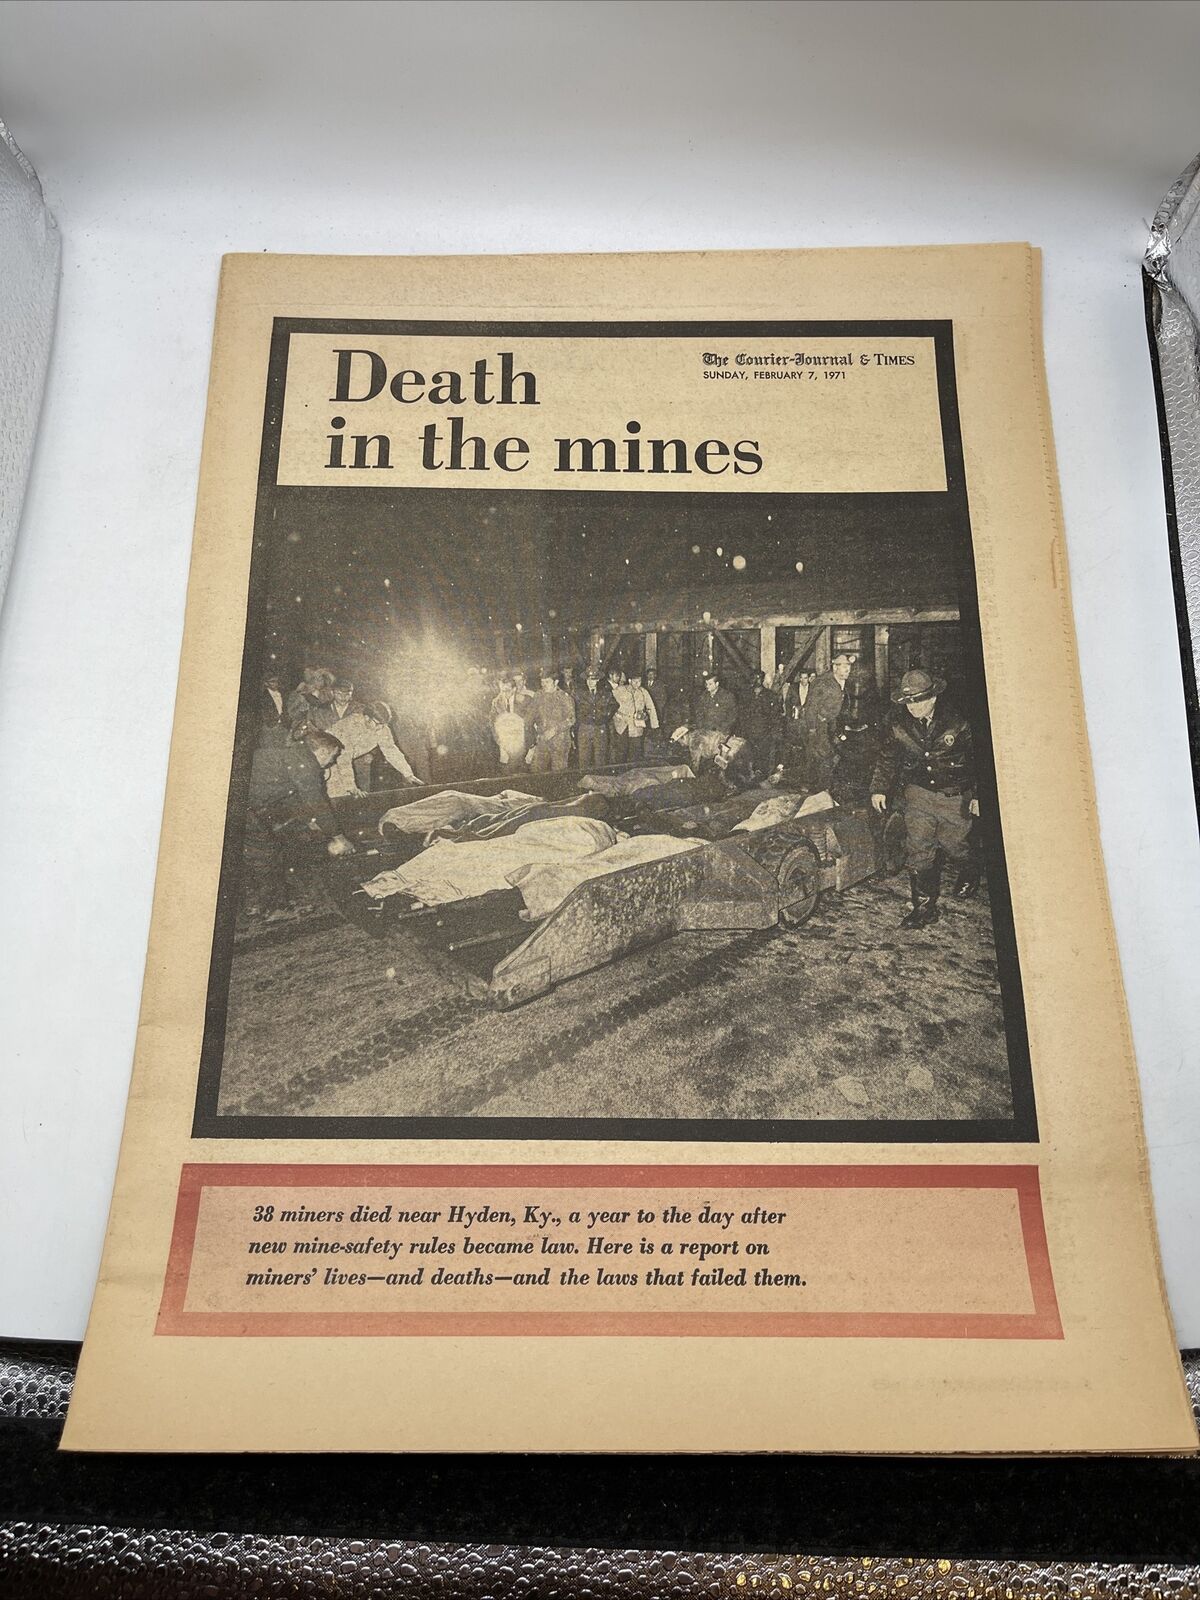 Death In The Mines - Courier Journal From February 7, 1971 - 38 Miners Hyden, KY